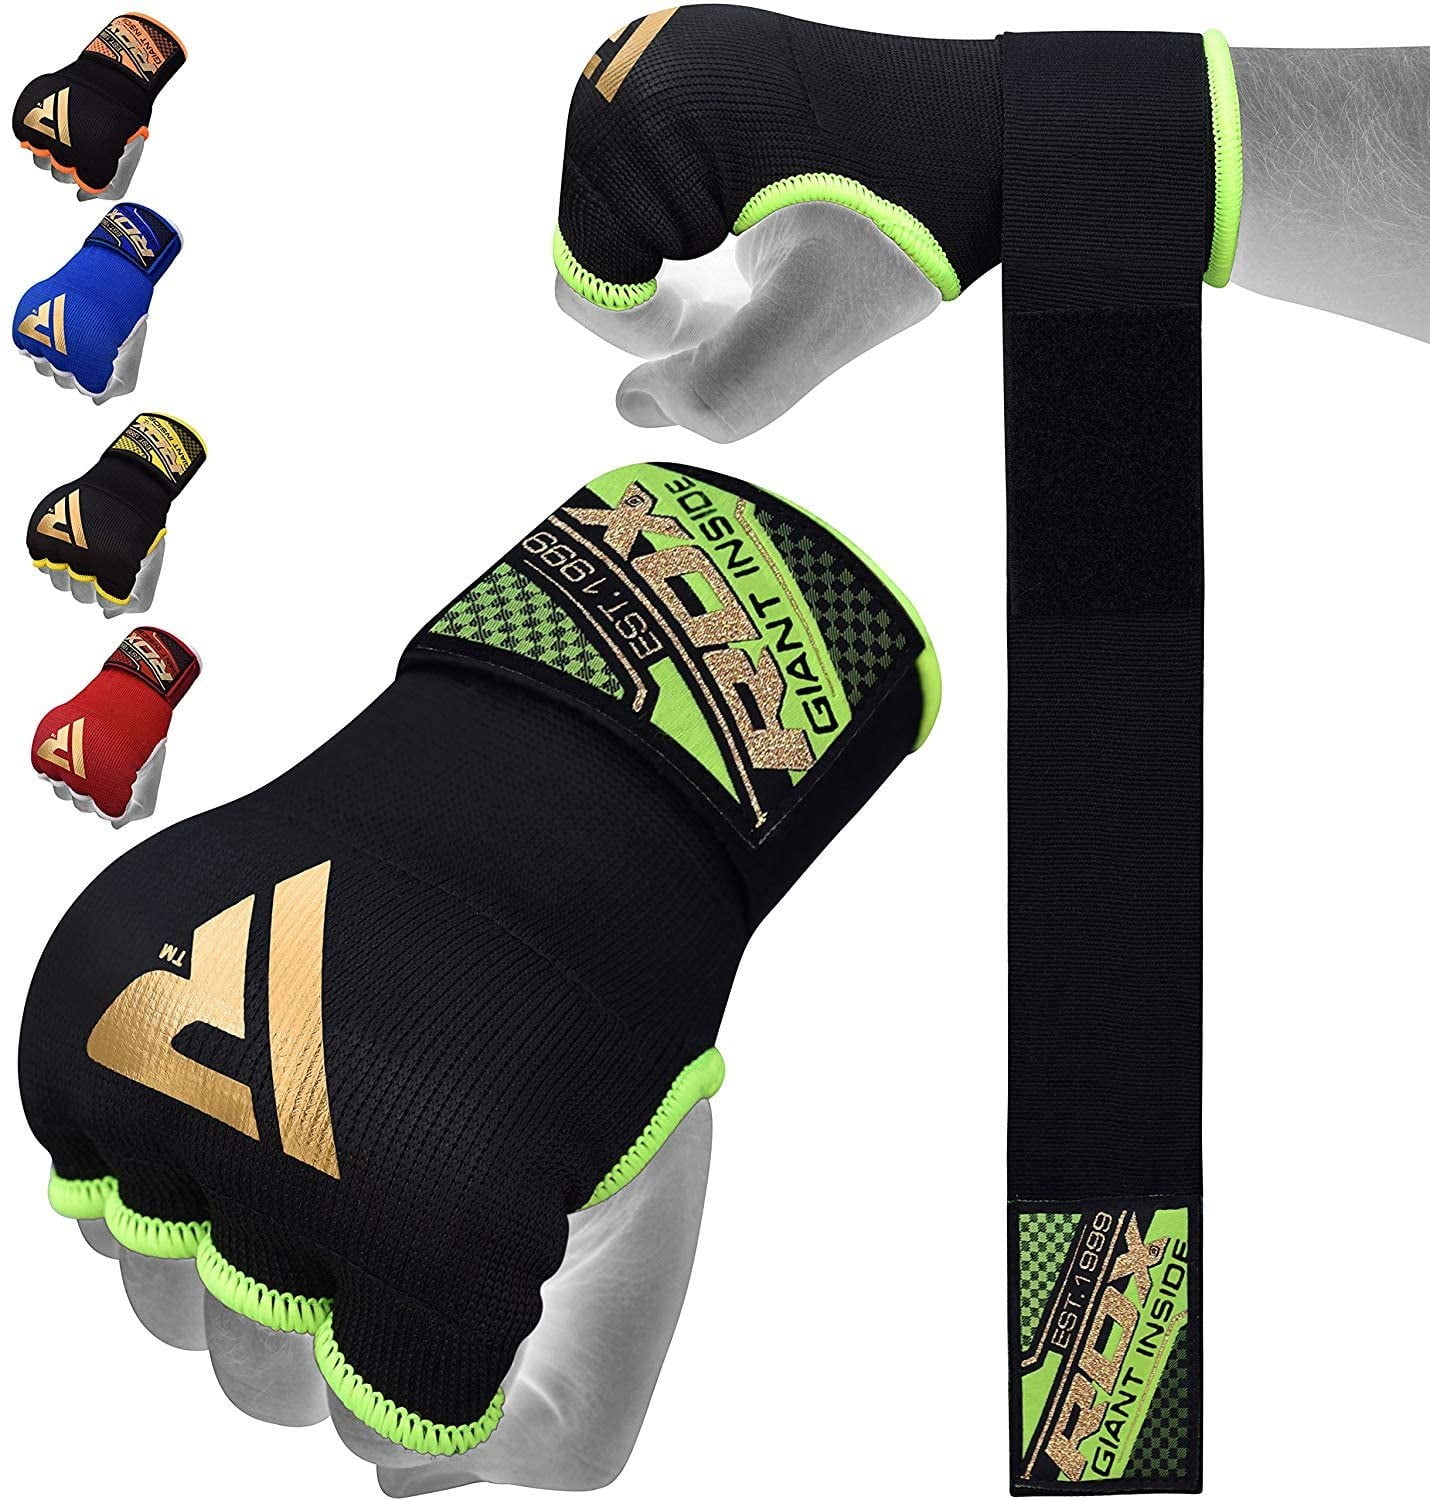 Boxing Quick Wraps MMA Muay Thai Hand Protector Inner Gloves Bandages Support 